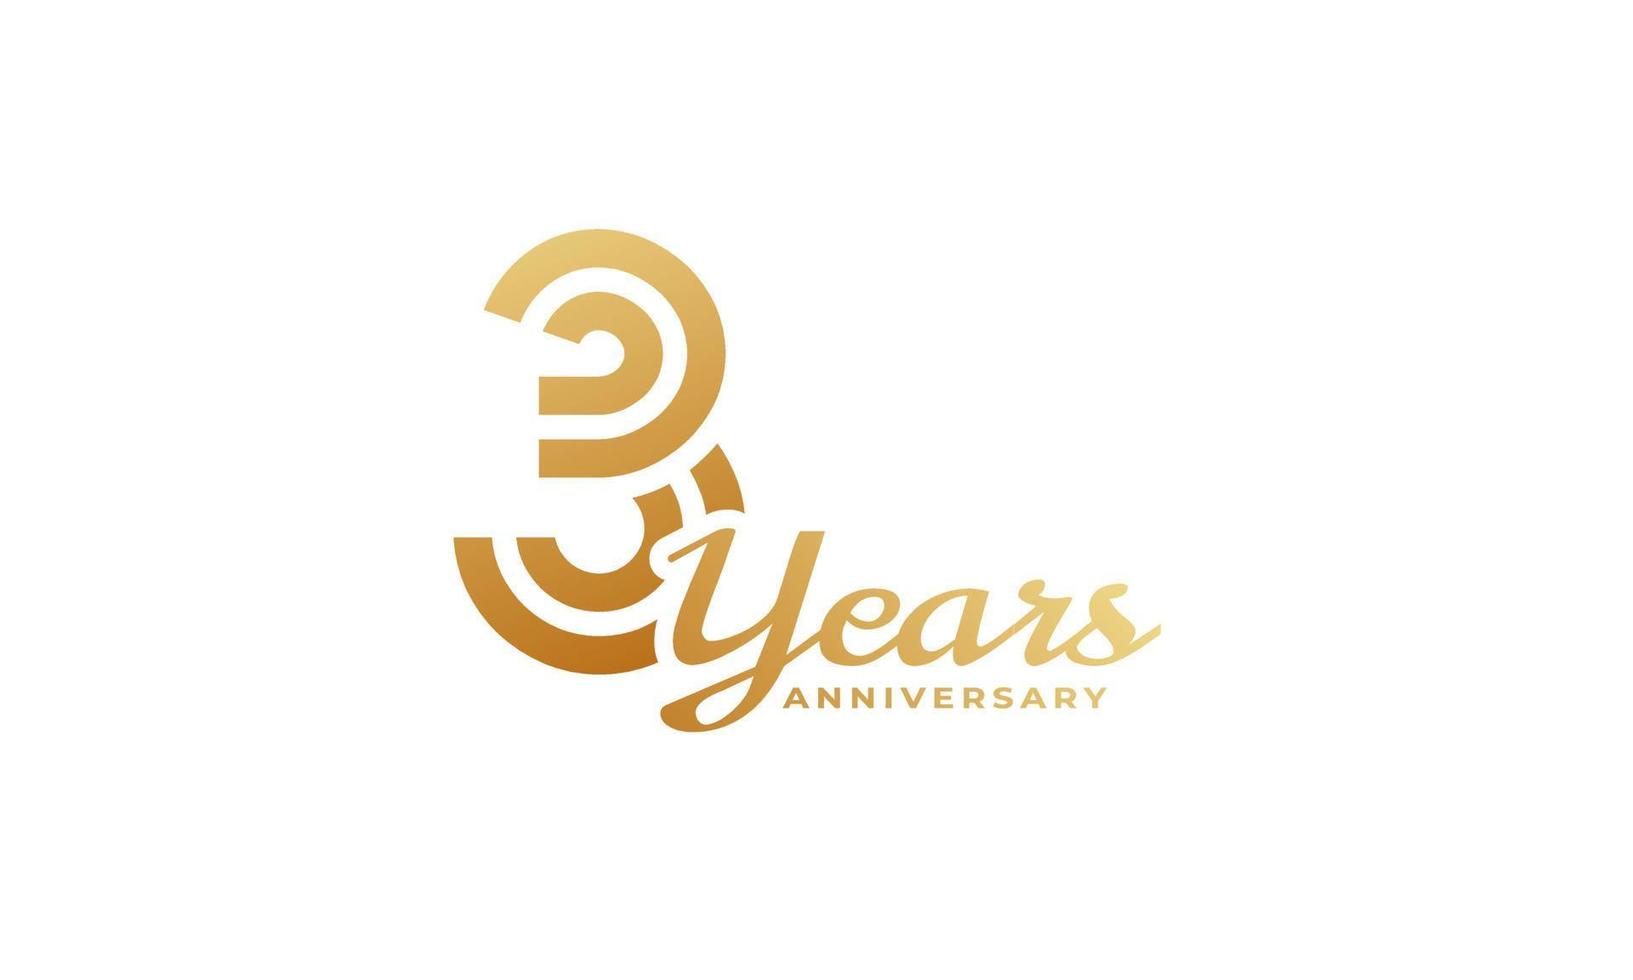 3 Year Anniversary Celebration with Handwriting Golden Color for Celebration Event, Wedding, Greeting card, and Invitation Isolated on White Background vector